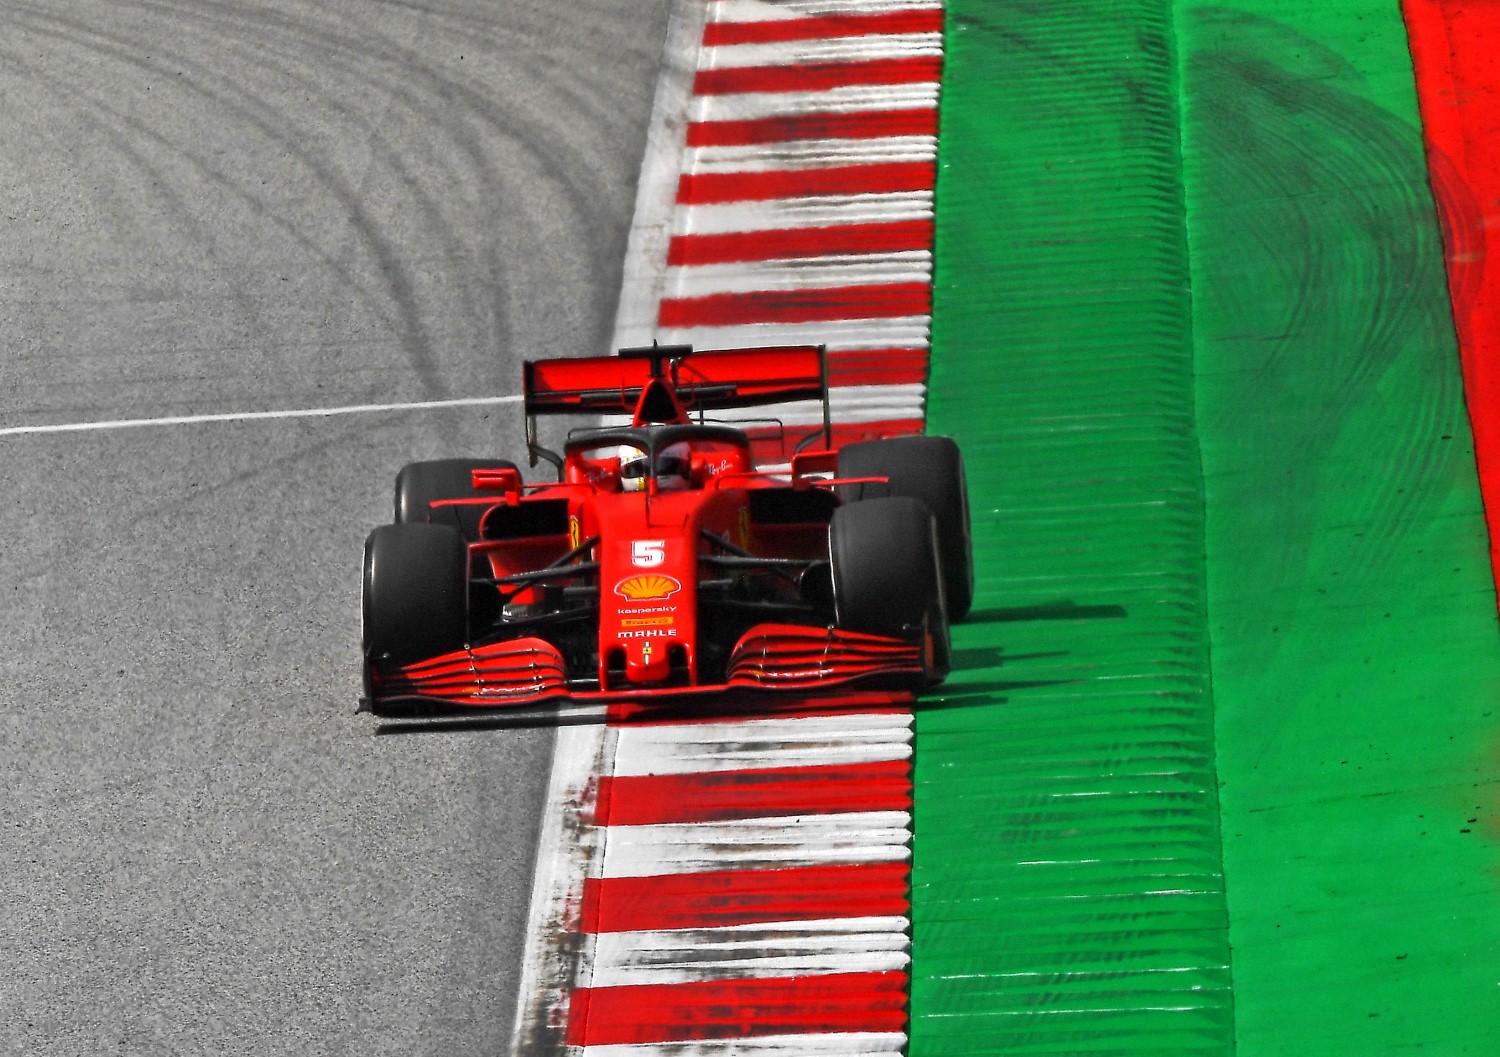 Vettel in the hapless Ferrari could only manage 11th